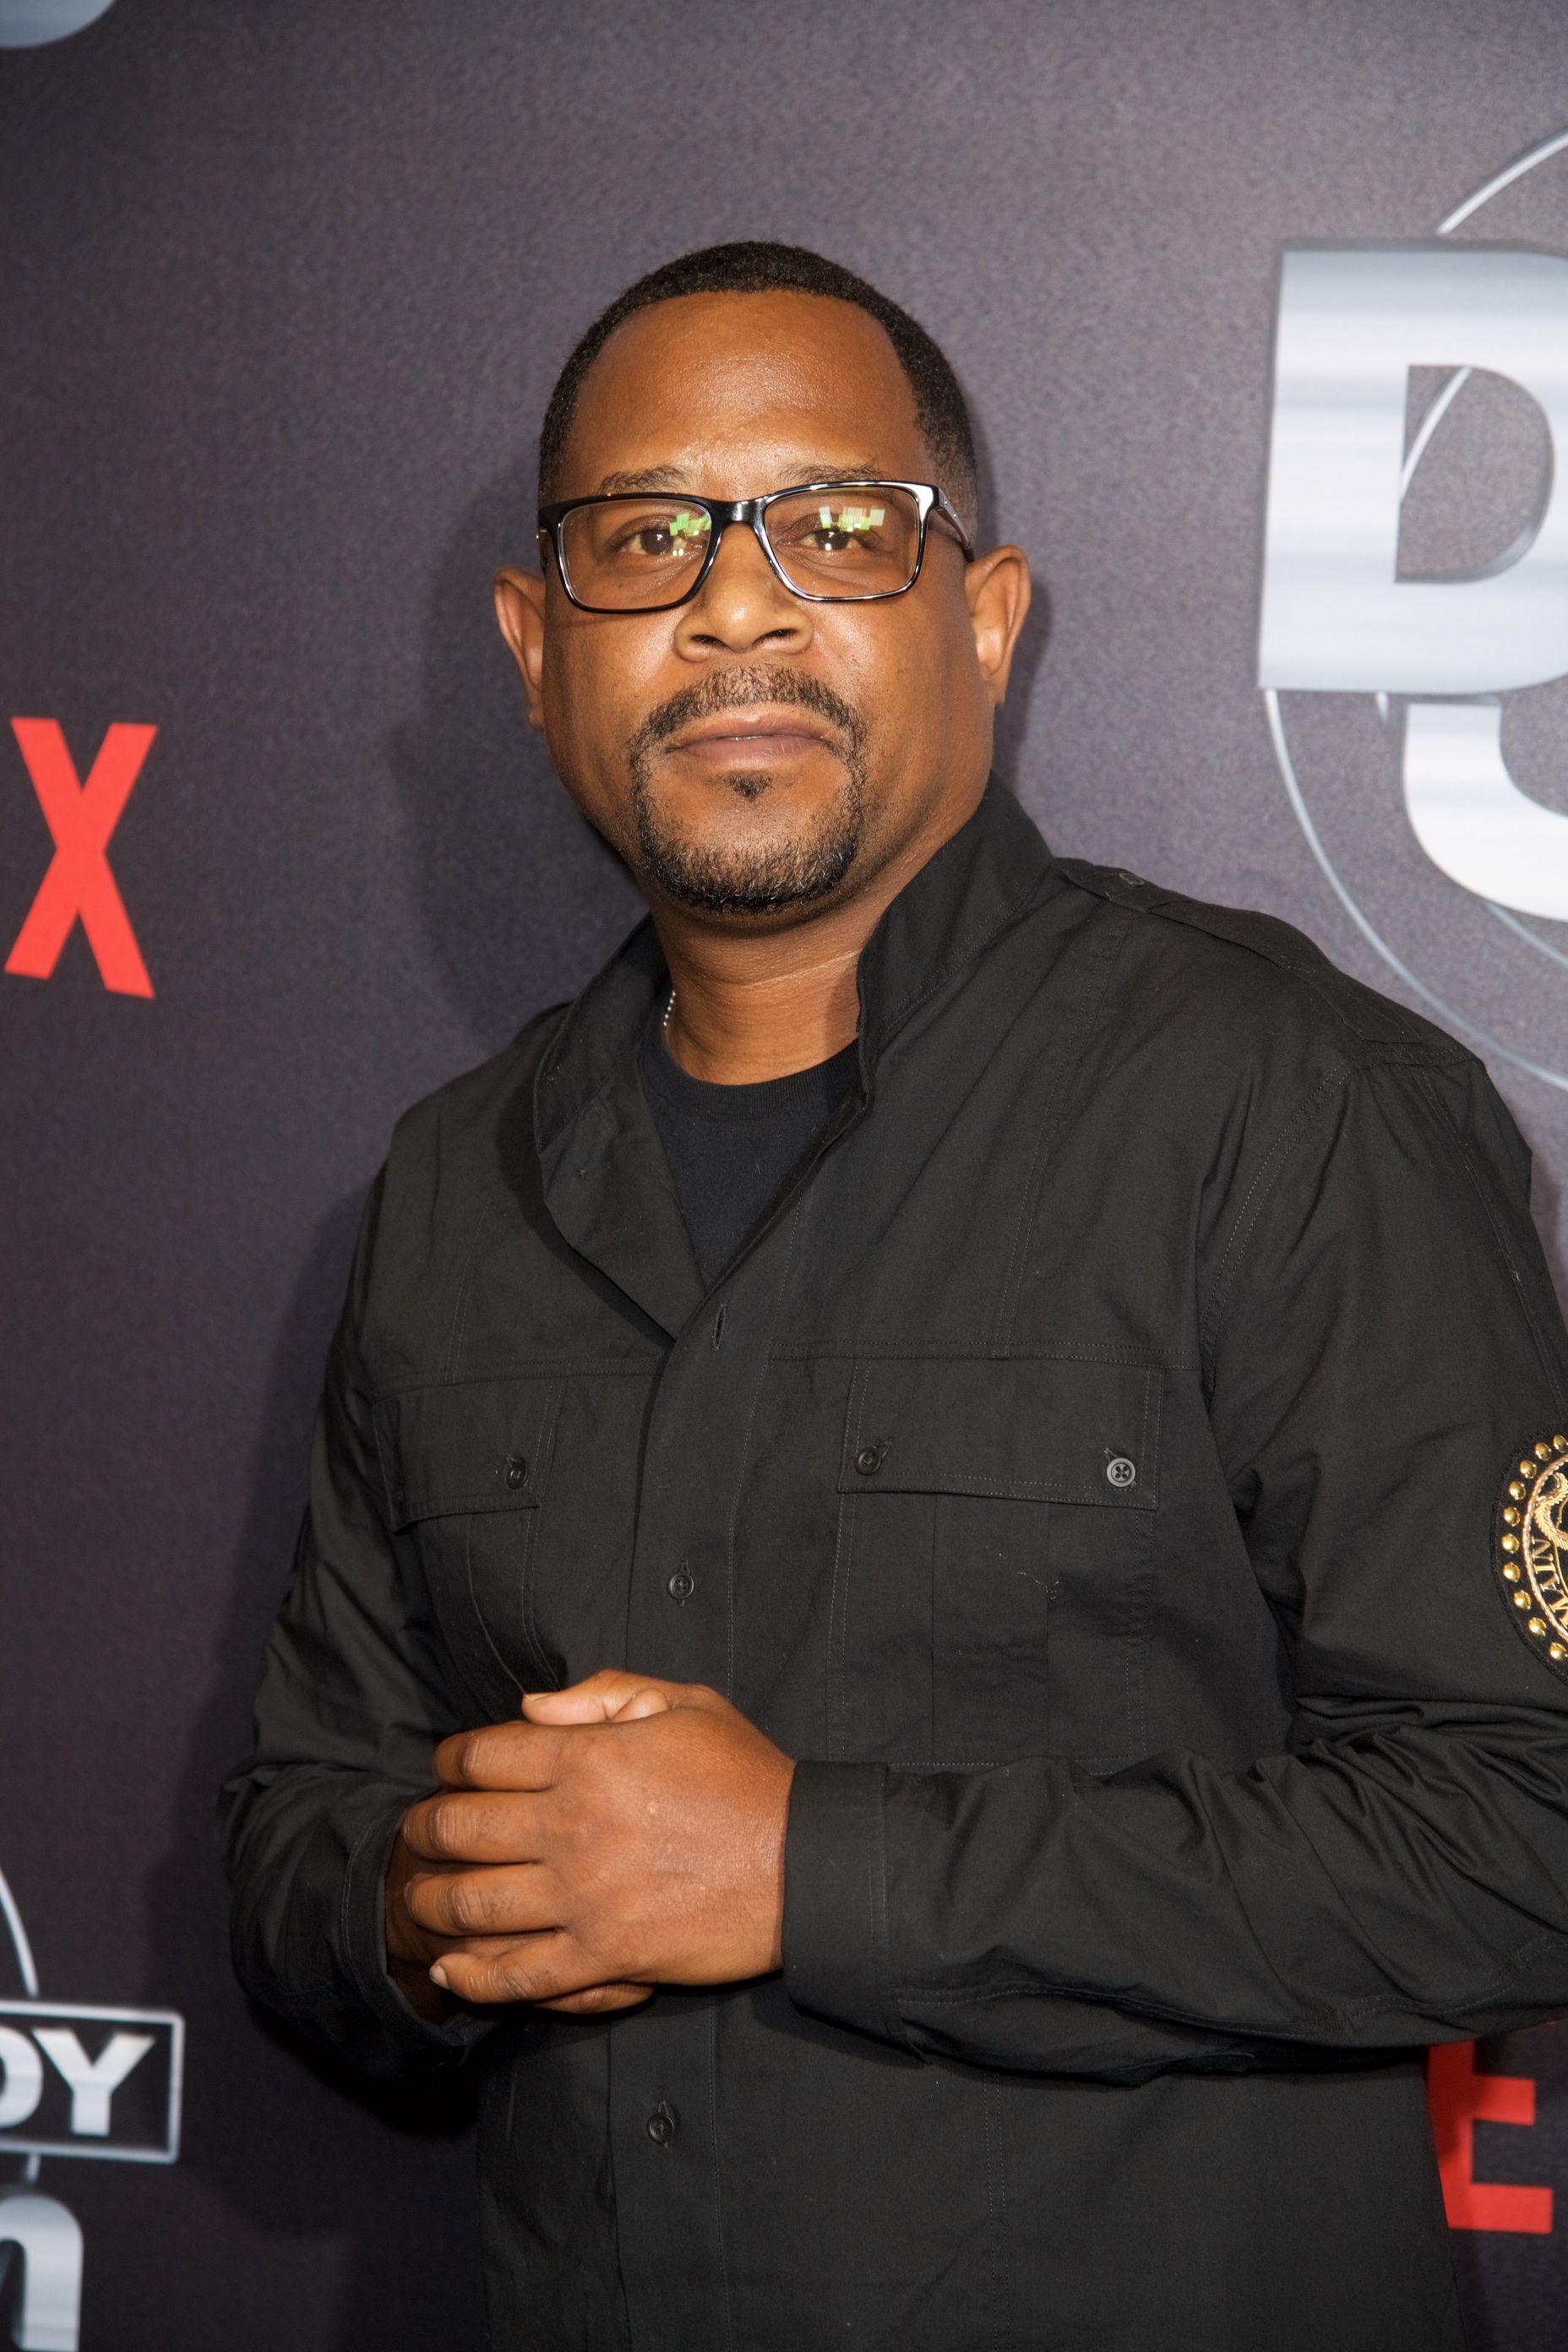 Martin Lawrence at Netflix Presents Russell Simmons "Def Comedy Jam 25" Special Event at The Beverly Hilton Hotel on September 10, 2017 in Beverly Hills, California.| Photo: Getty Images